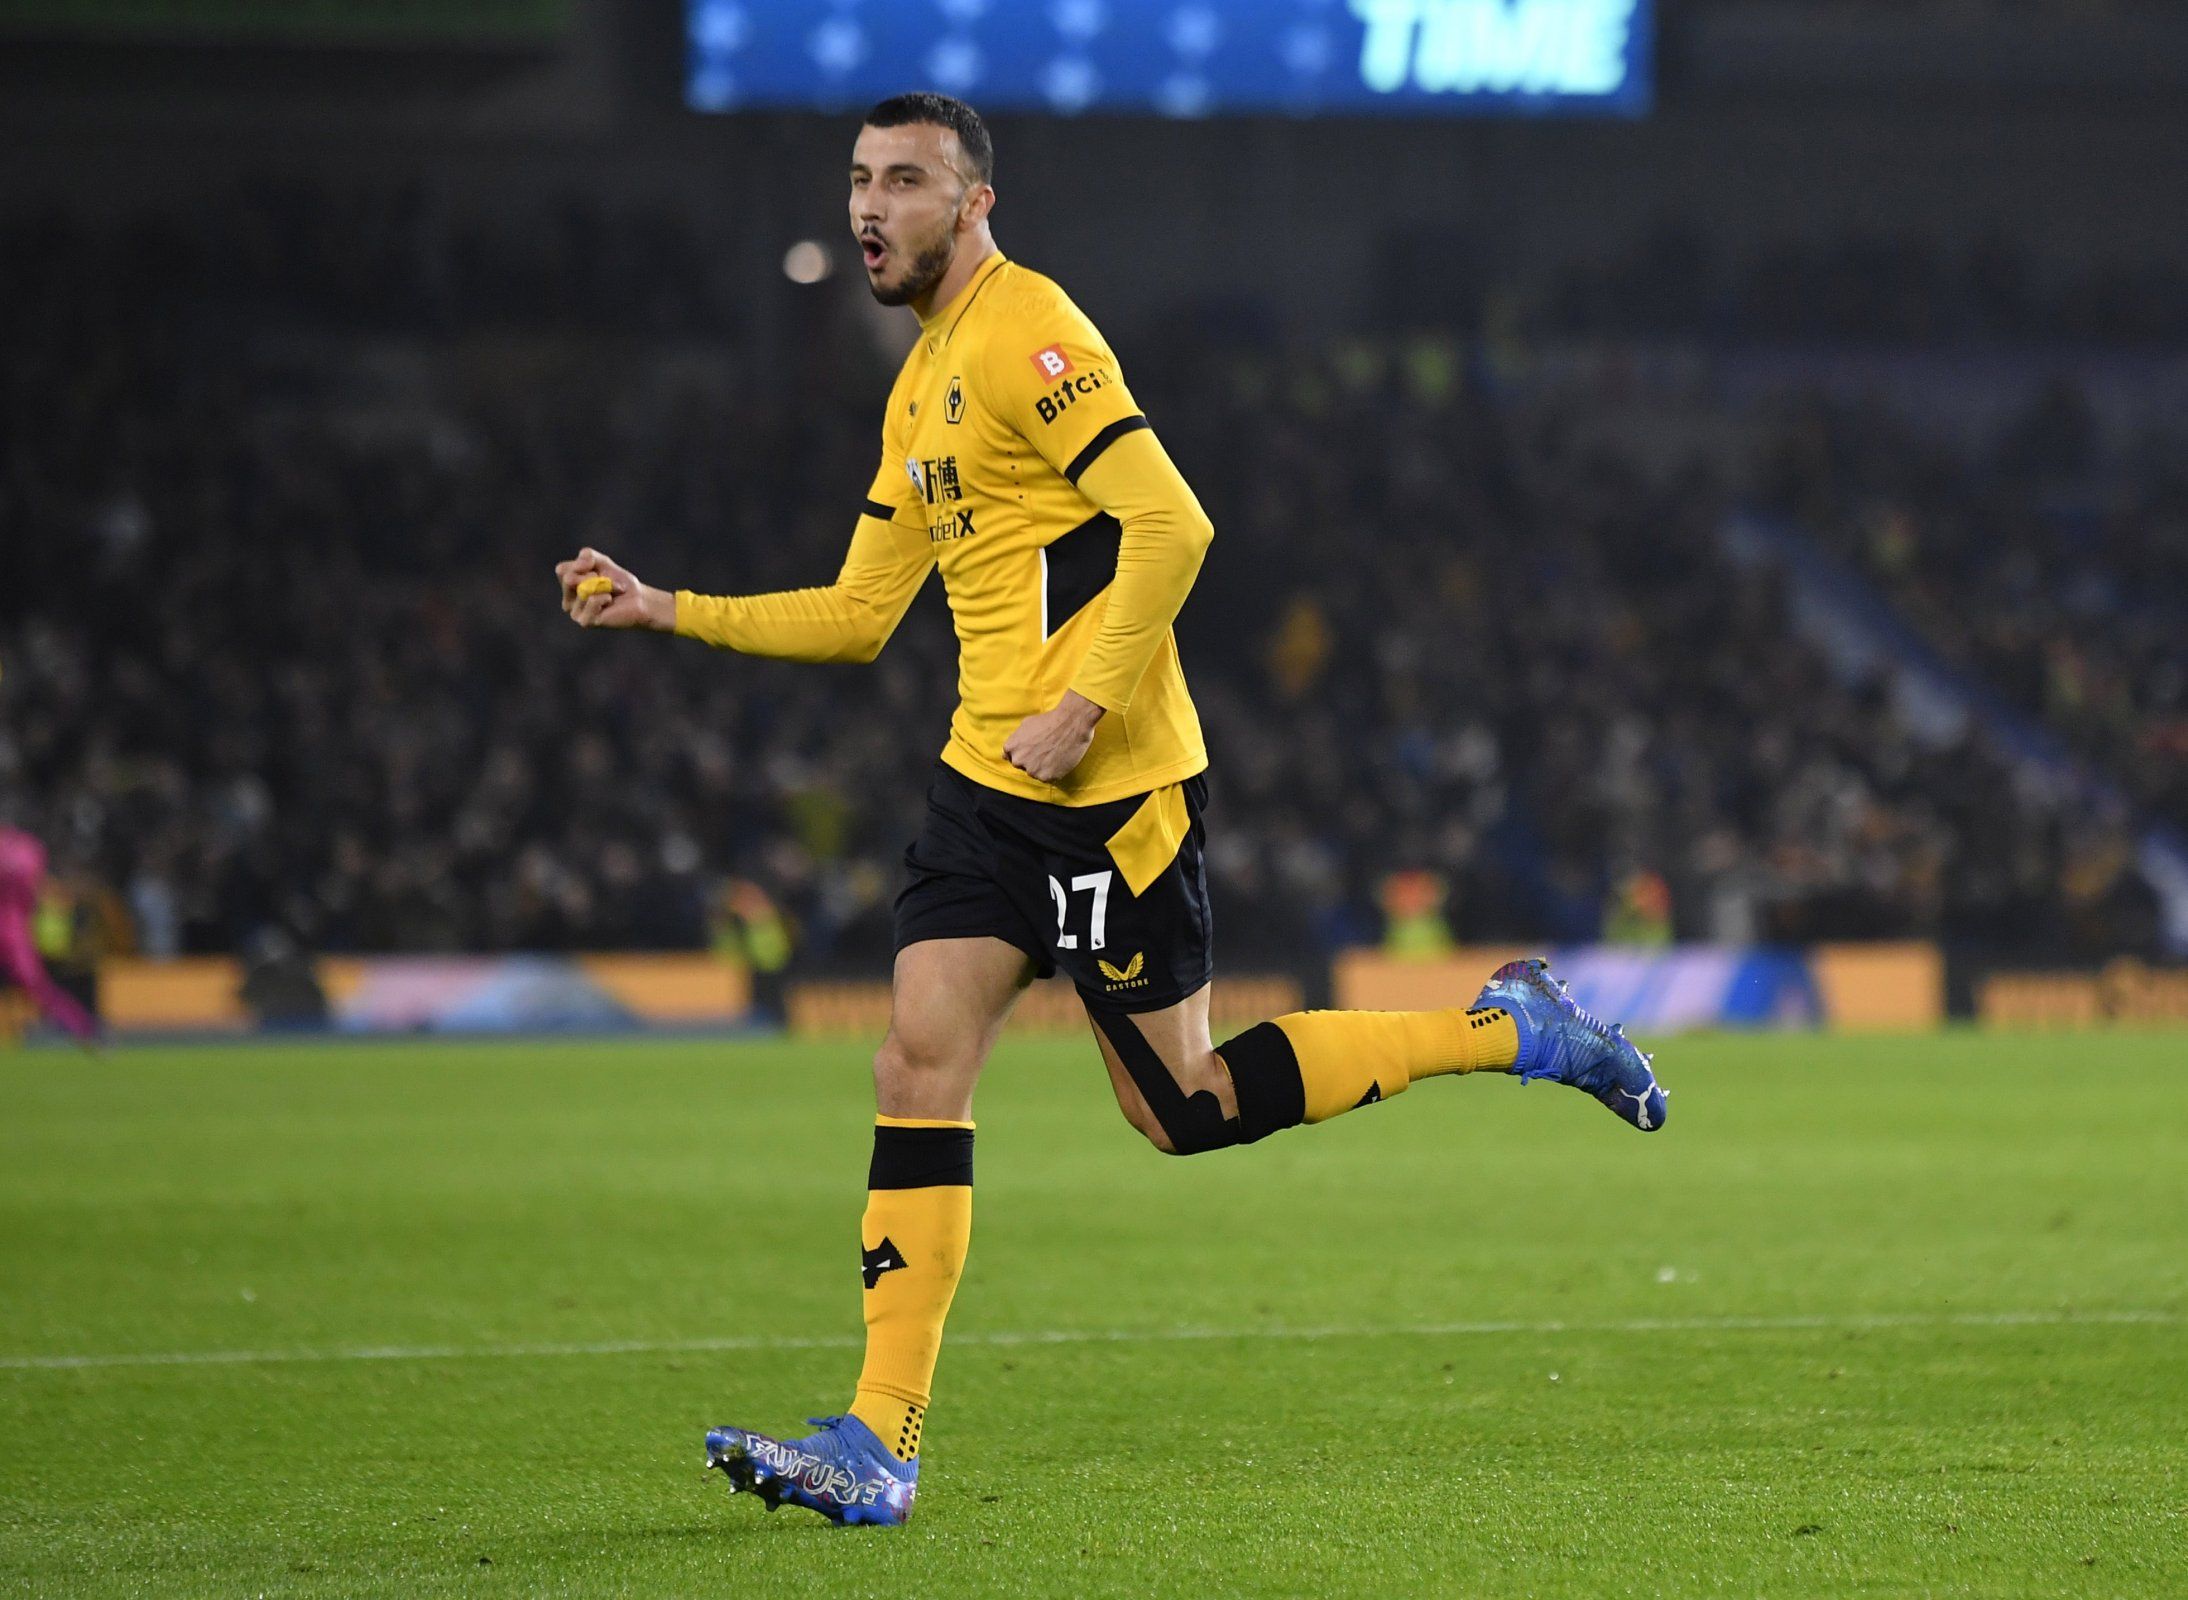 Bruno Lage, Fosun, Jeff Shi, Molineux, The Old Gold, Wolves, Wolves fans, Wolves info, Wolves latest, Wolves news, Wolves updates, WWFC, WWFC news, WWFC update, Premier League, Premier League news, Wolverhampton Wanderers, Romain Saiss, Performance in numbers, 
